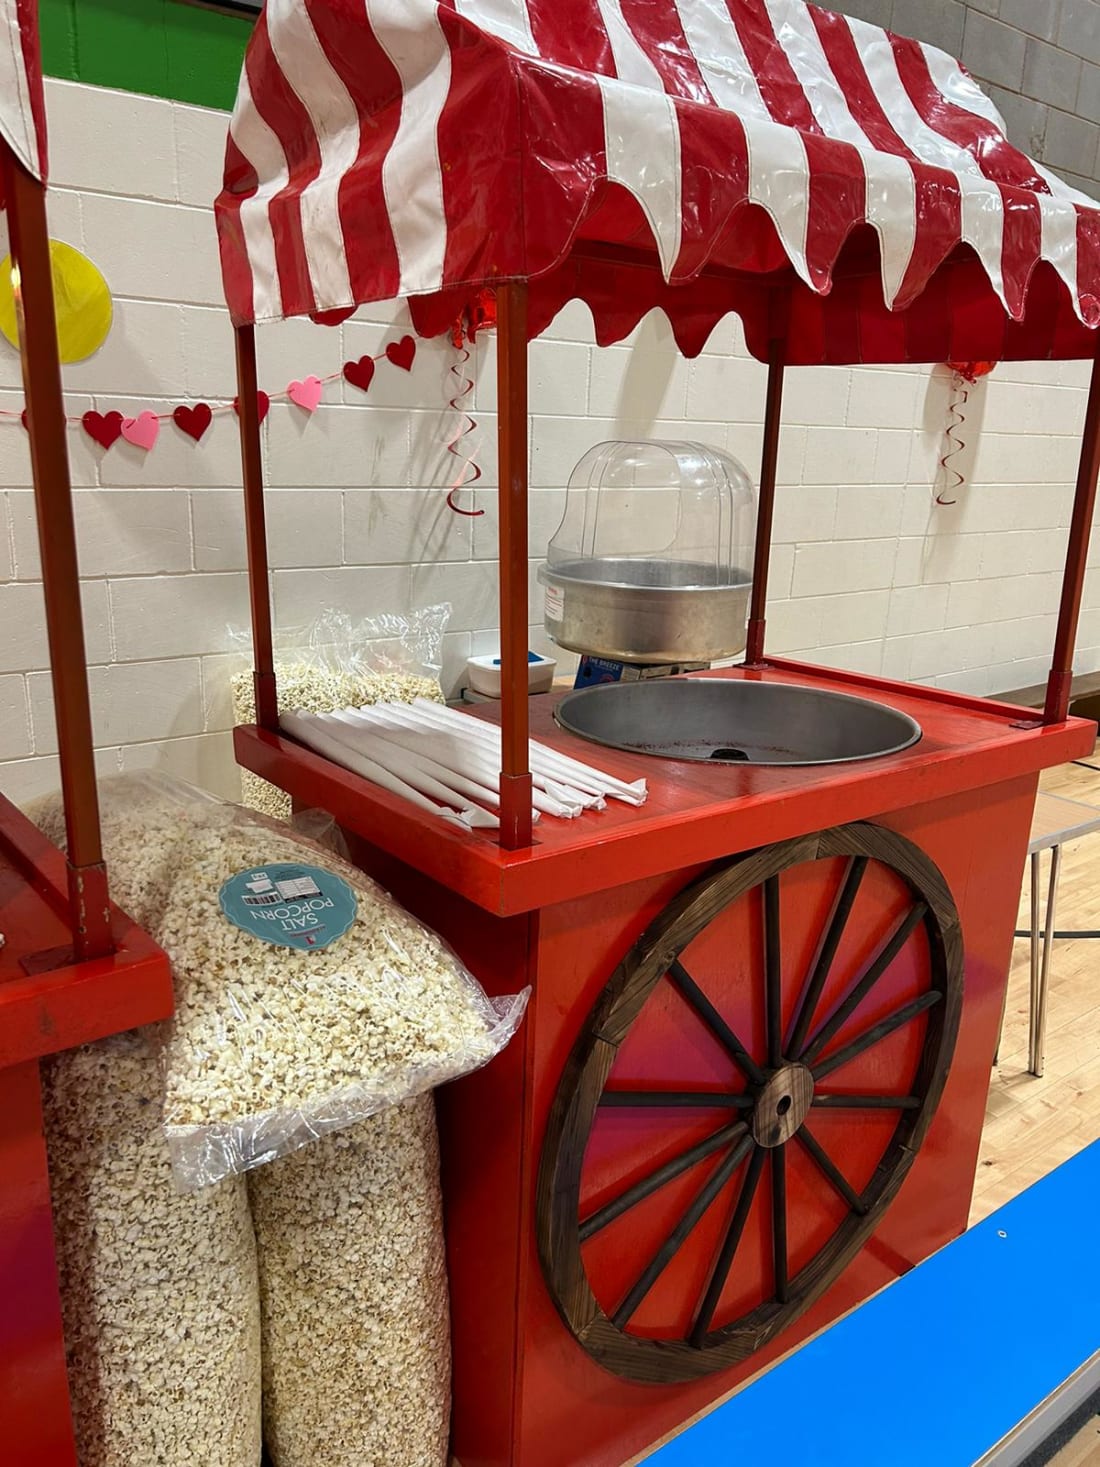 Pick n Mix Stand / Sweet Cart Hire - Rodeo Bull Hire in Essex